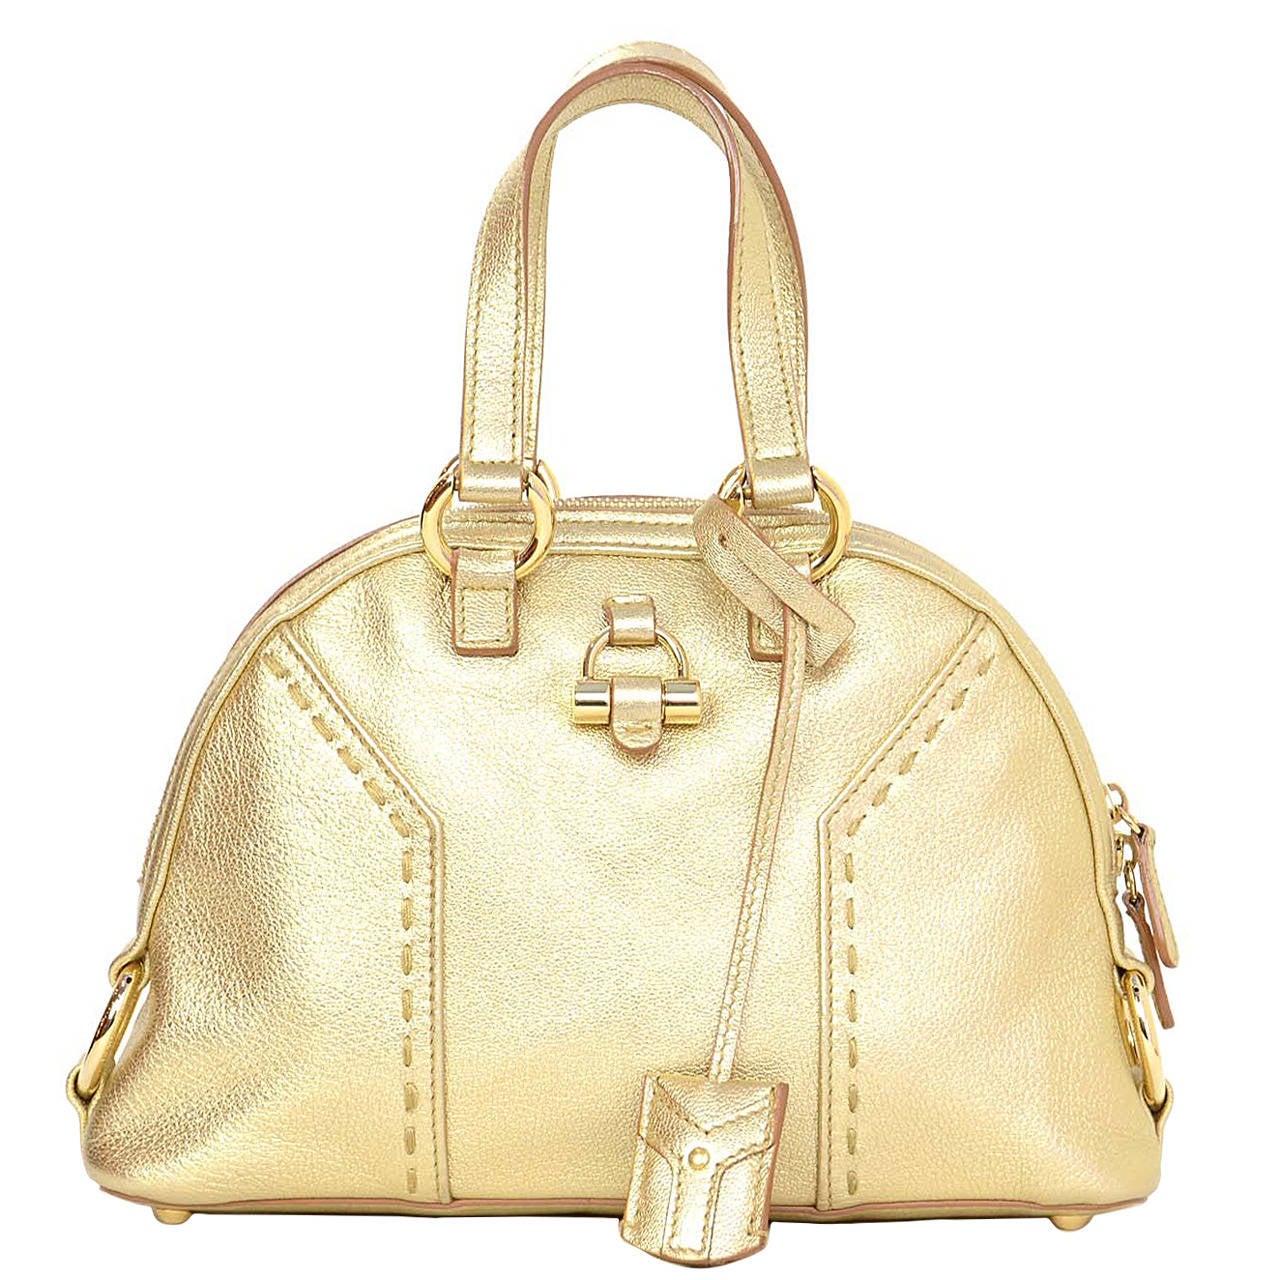 YVES SAINT LAURENT YSL 2008 Gold Leather Micro Muse Bag